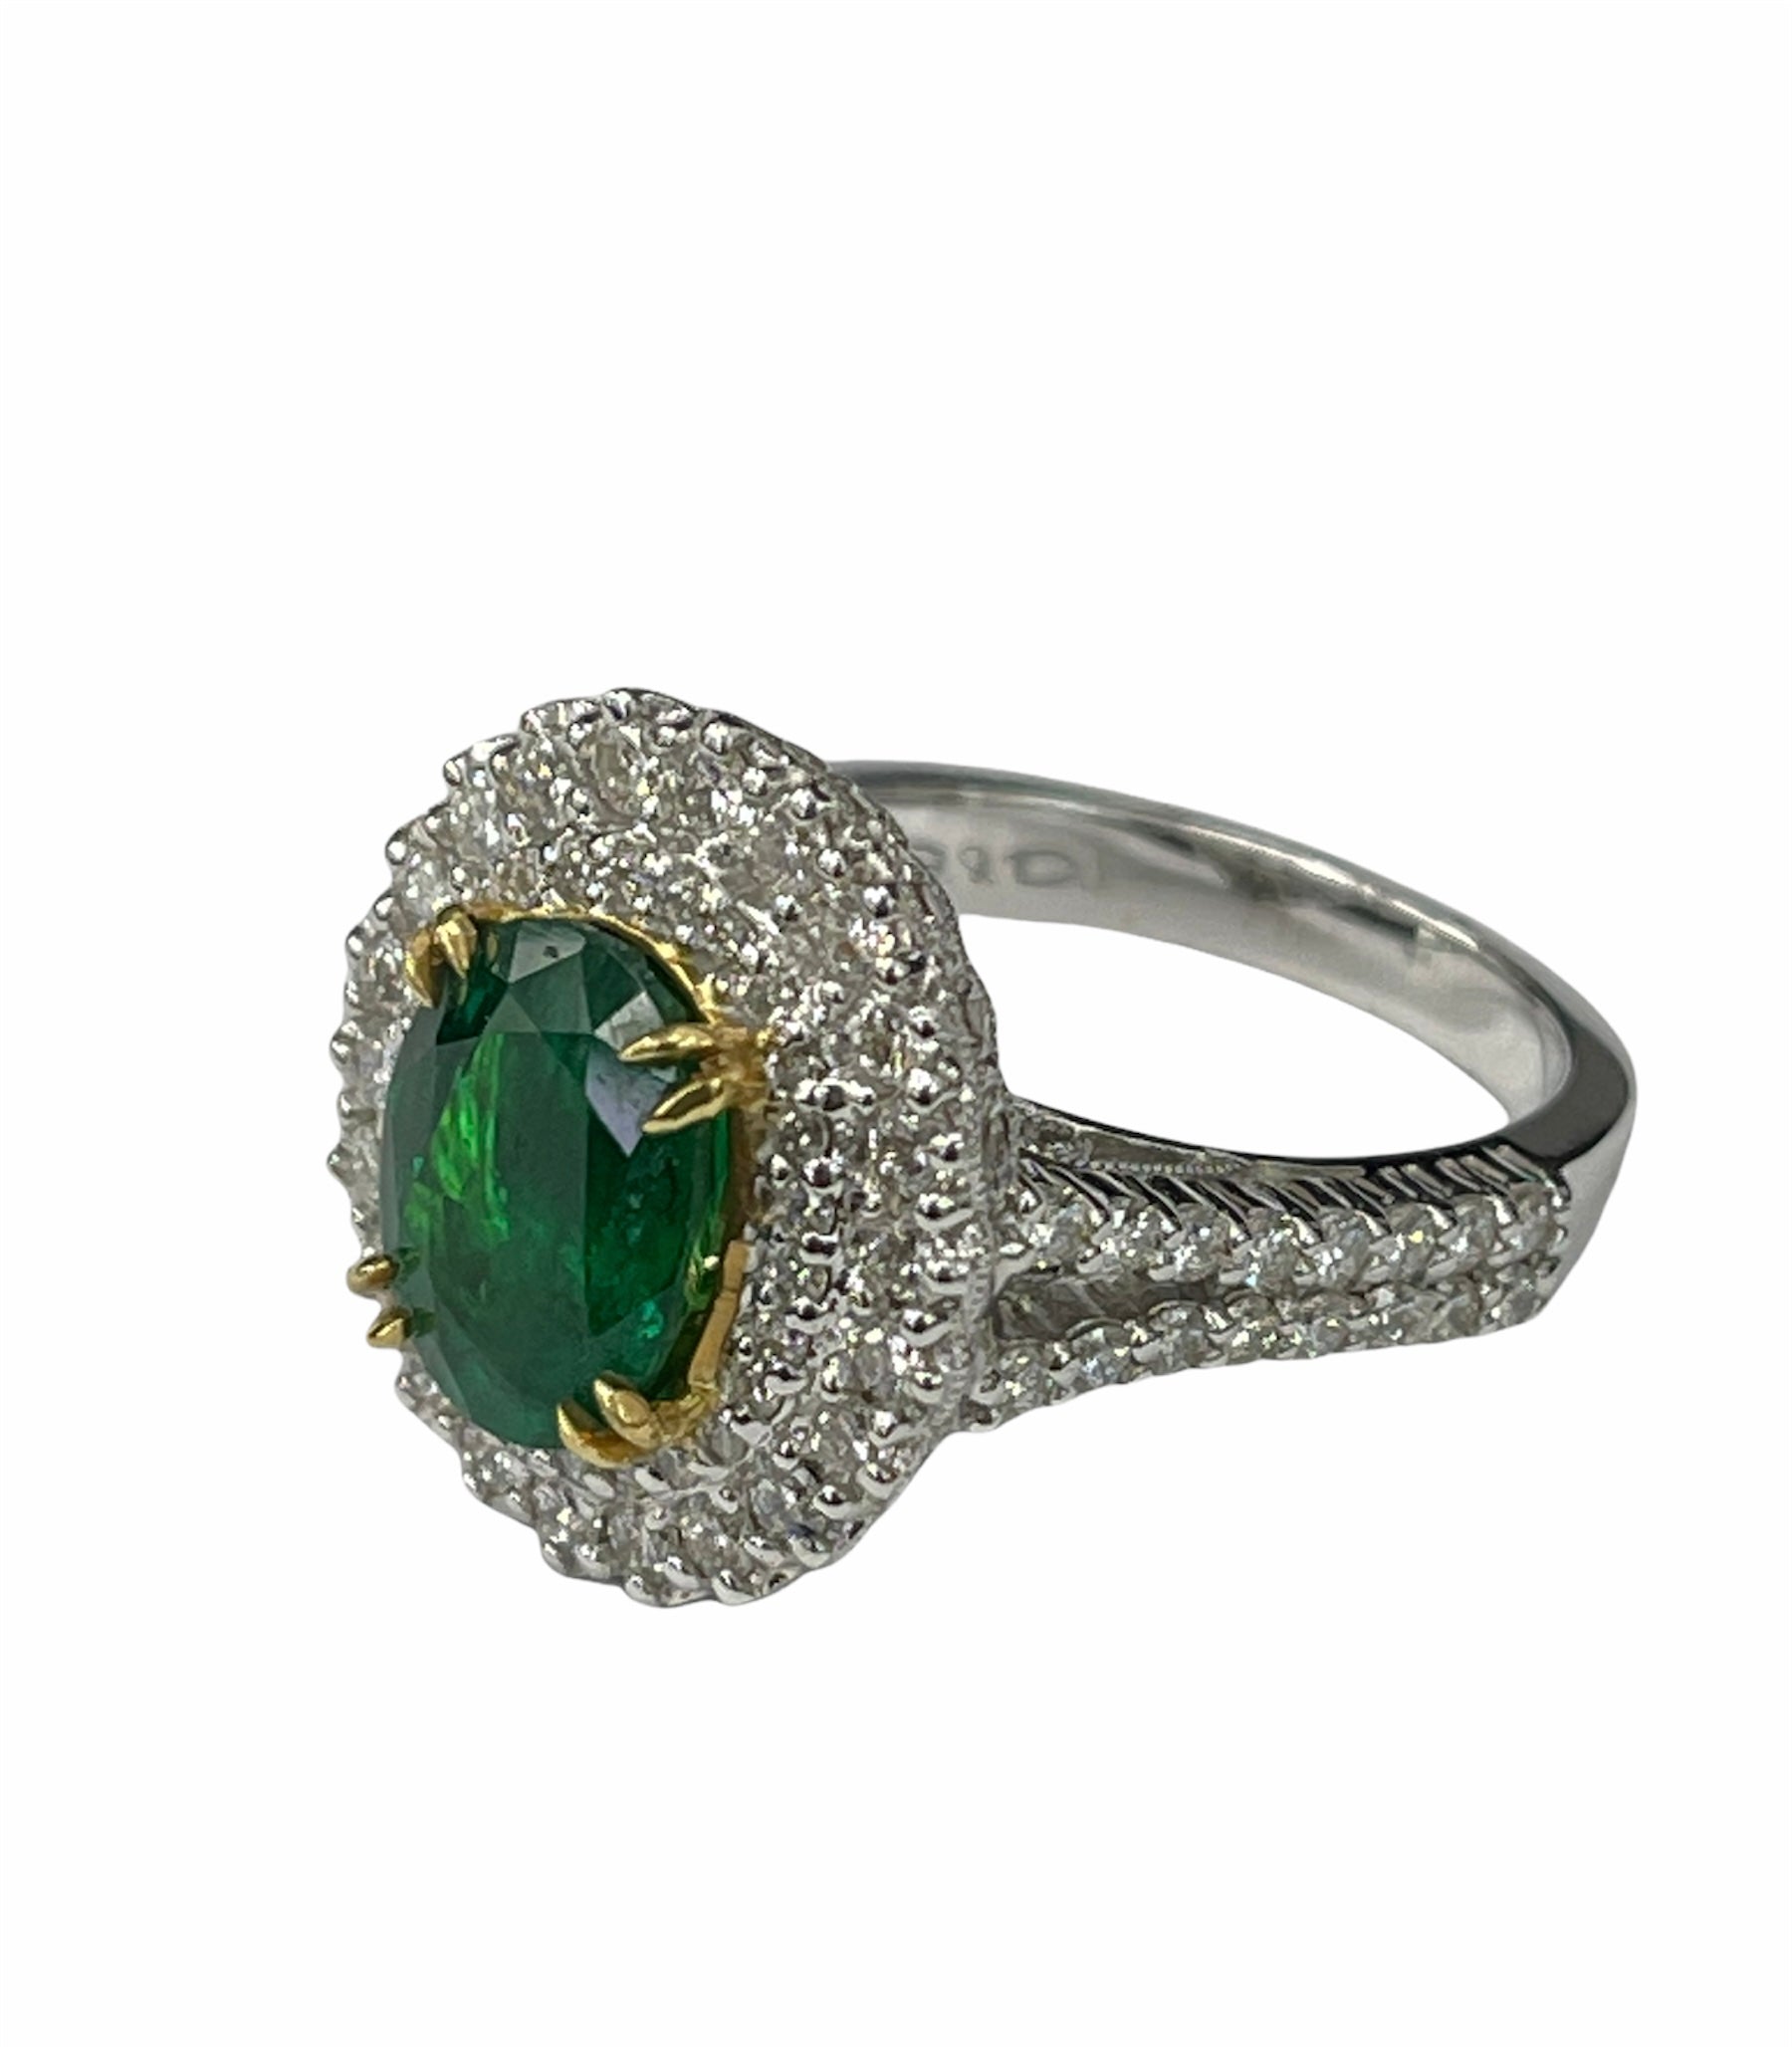 Columboan Oval Emerald Diamond Ring with Accents White Gold 18kt